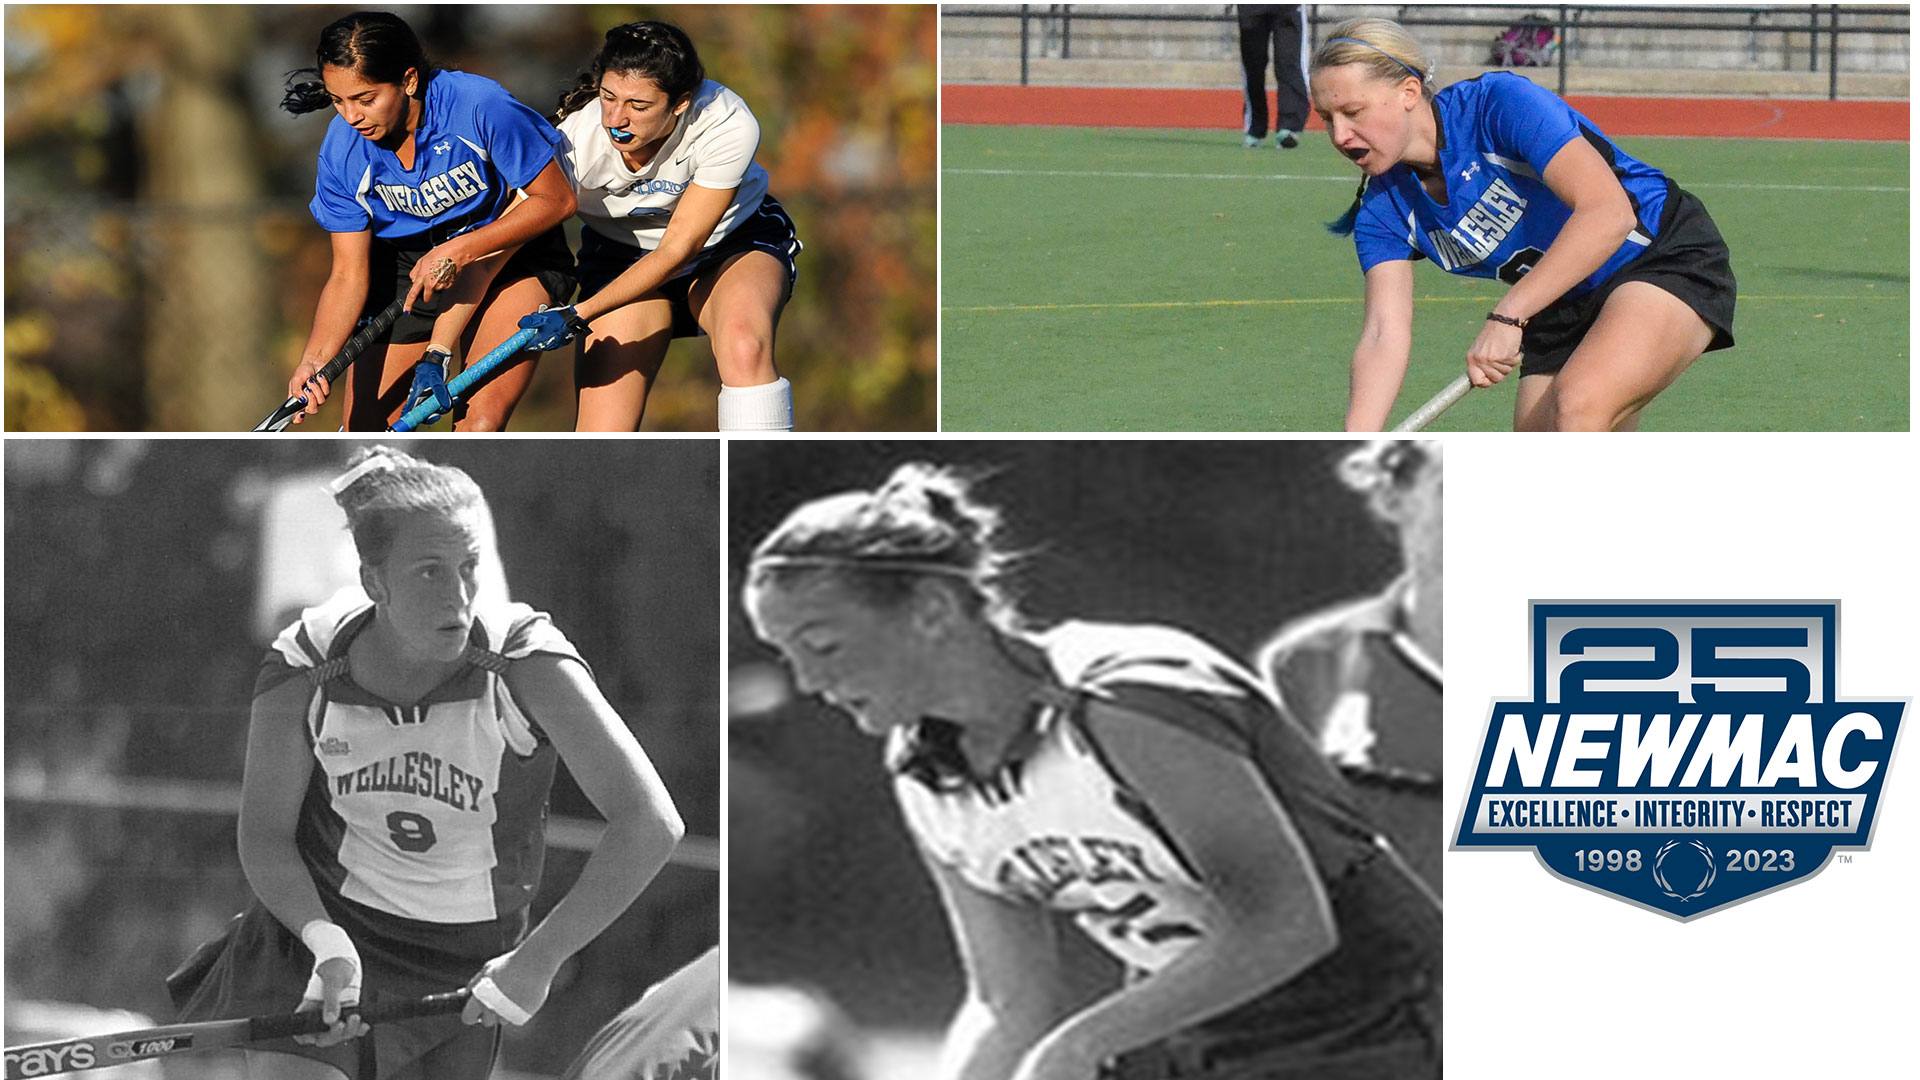 Six Named Named to NEWMAC 25th Year All-Field Hockey Team